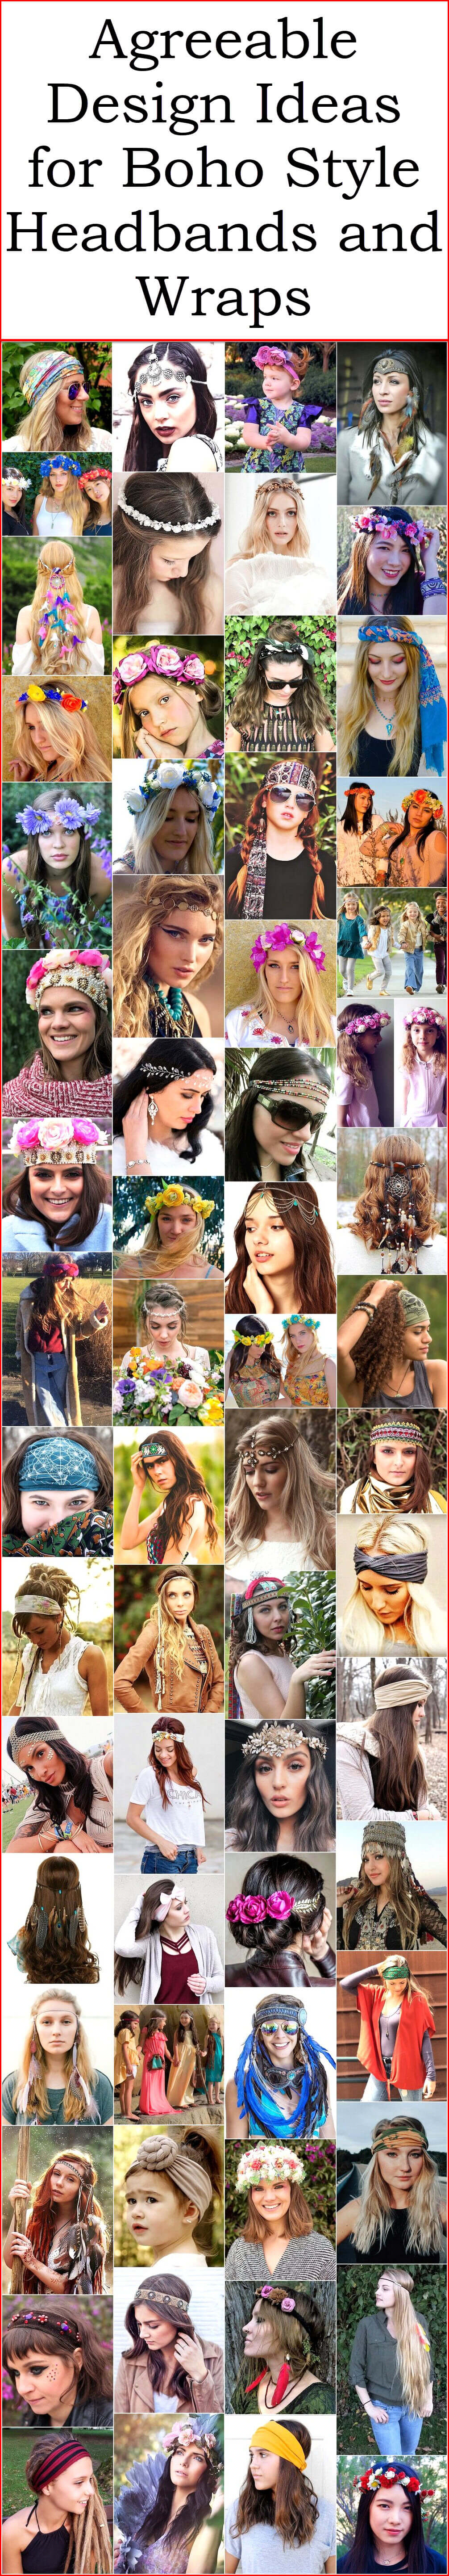 Agreeable Design Ideas for Boho Style Headbands and Wraps